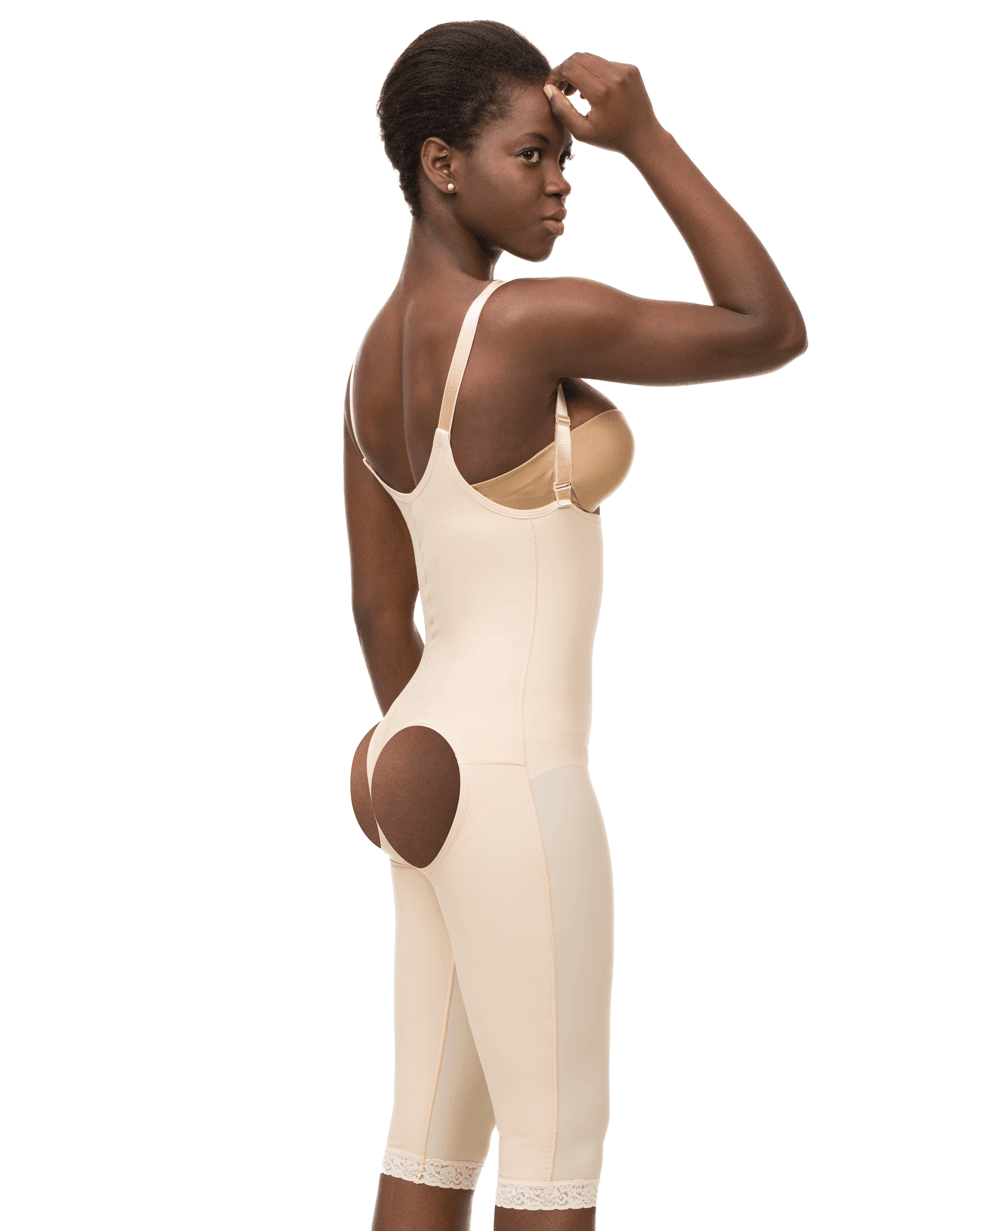 Isavela Stage 1 Compression Body Suit with Bra - Mid-Thigh